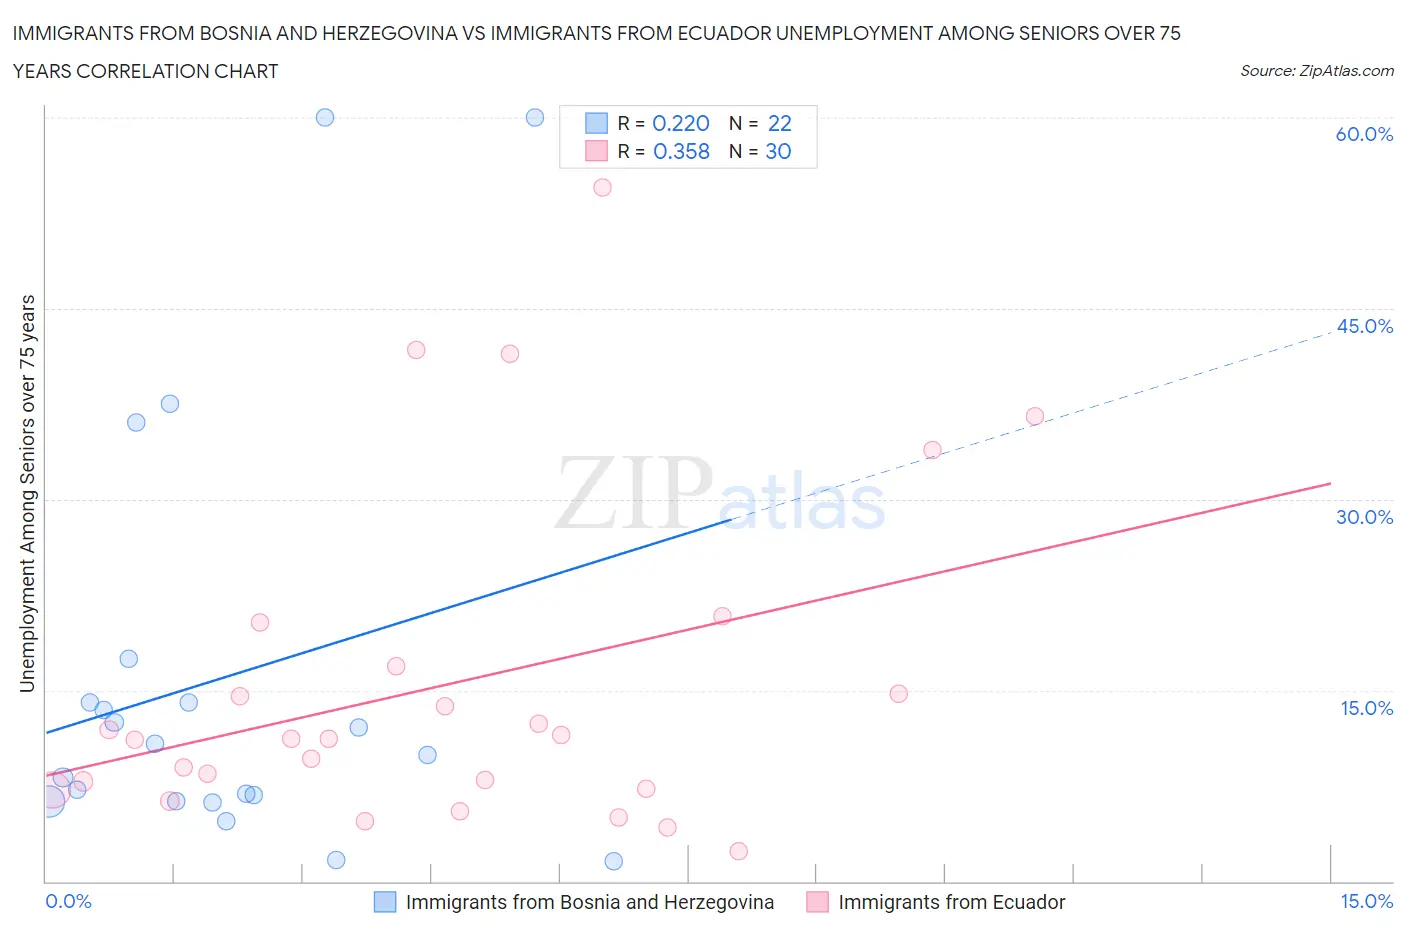 Immigrants from Bosnia and Herzegovina vs Immigrants from Ecuador Unemployment Among Seniors over 75 years